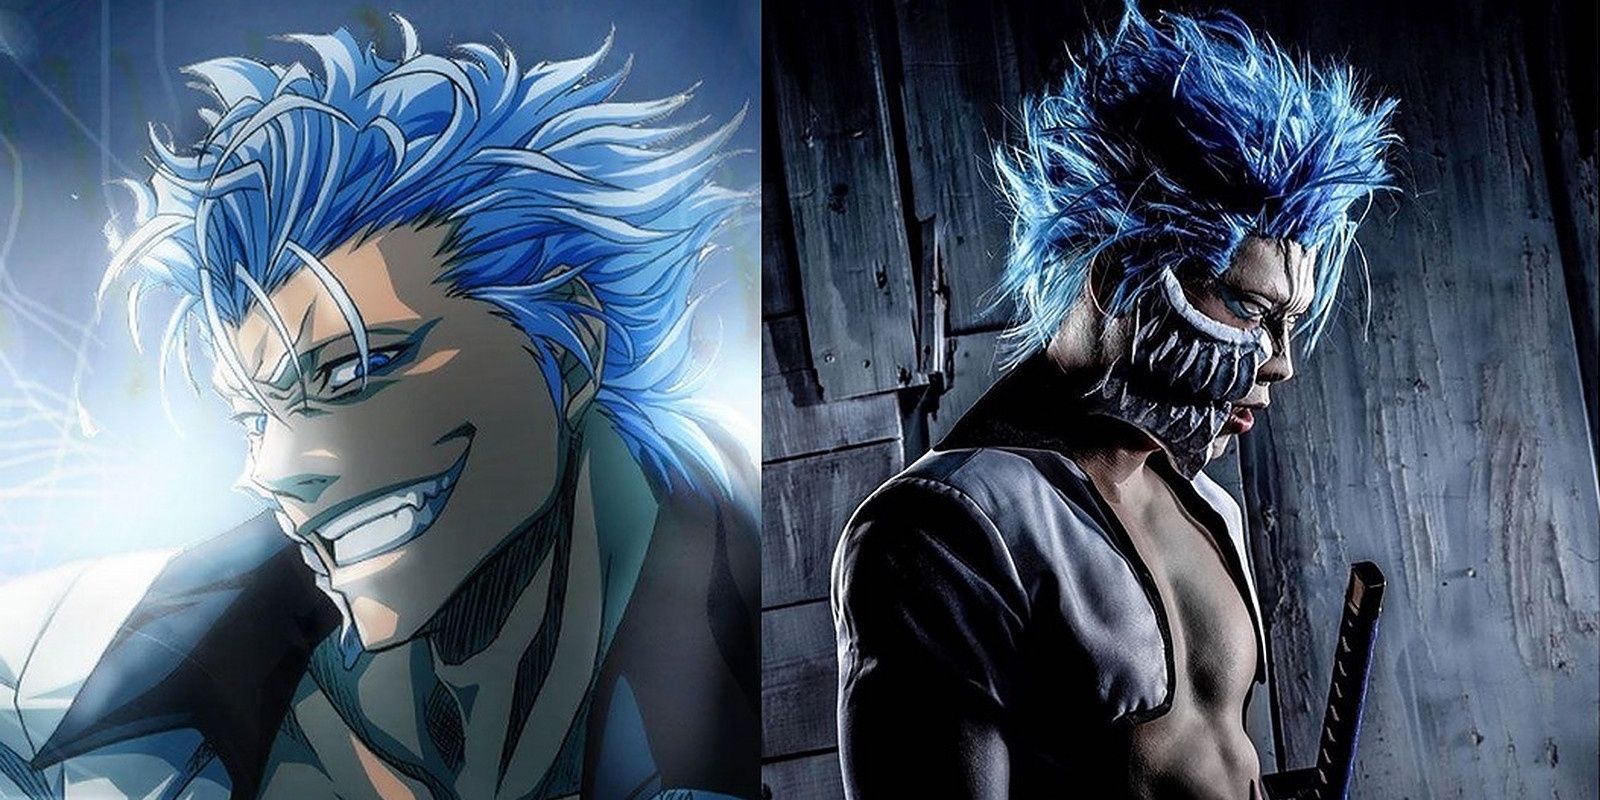 Bleach Cosplay Unleashes The Fury of the Arrancar, Ulquiorra and Grimmjow